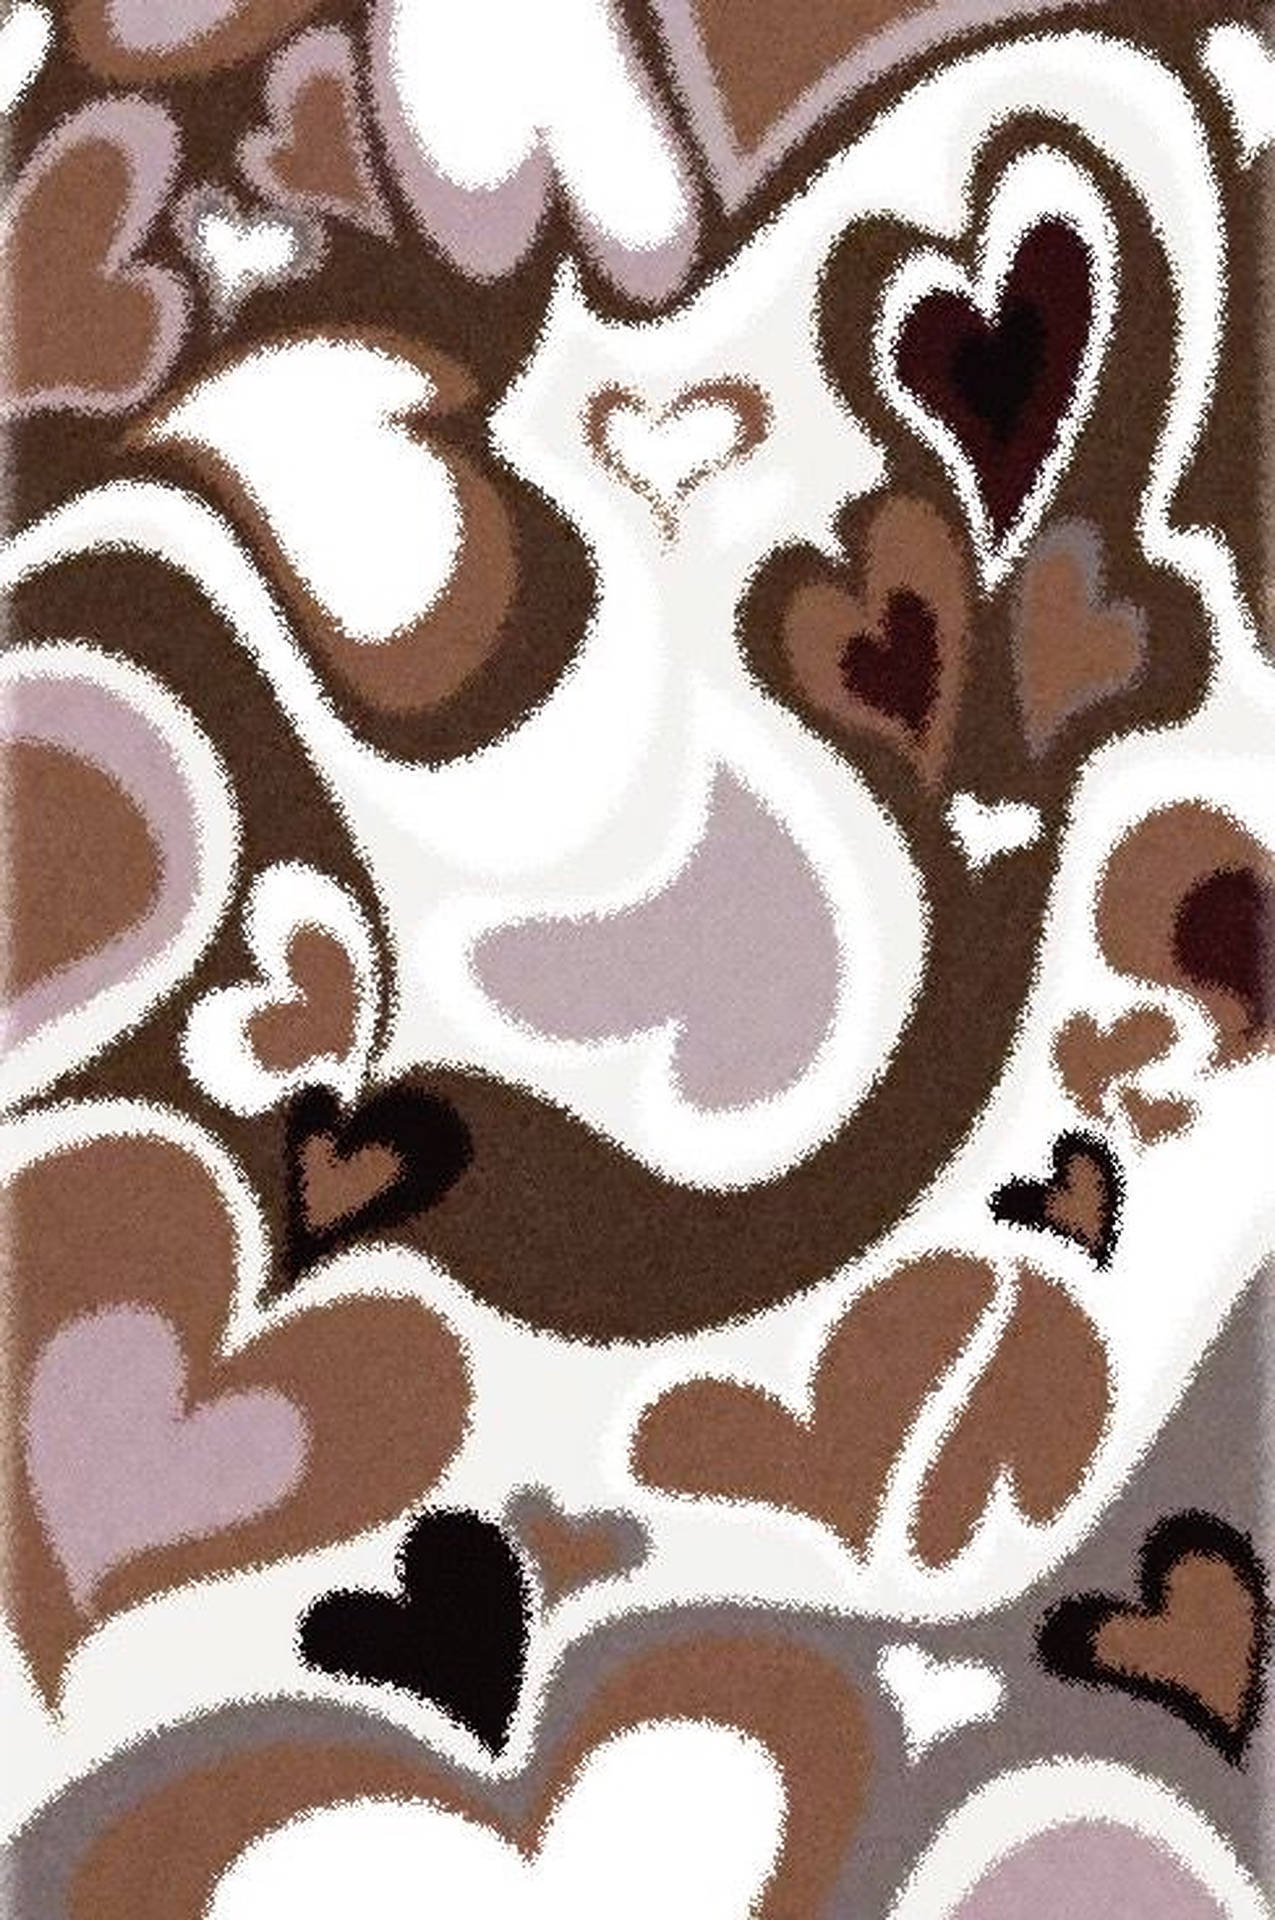 Fuzzy Brown Hearts Background